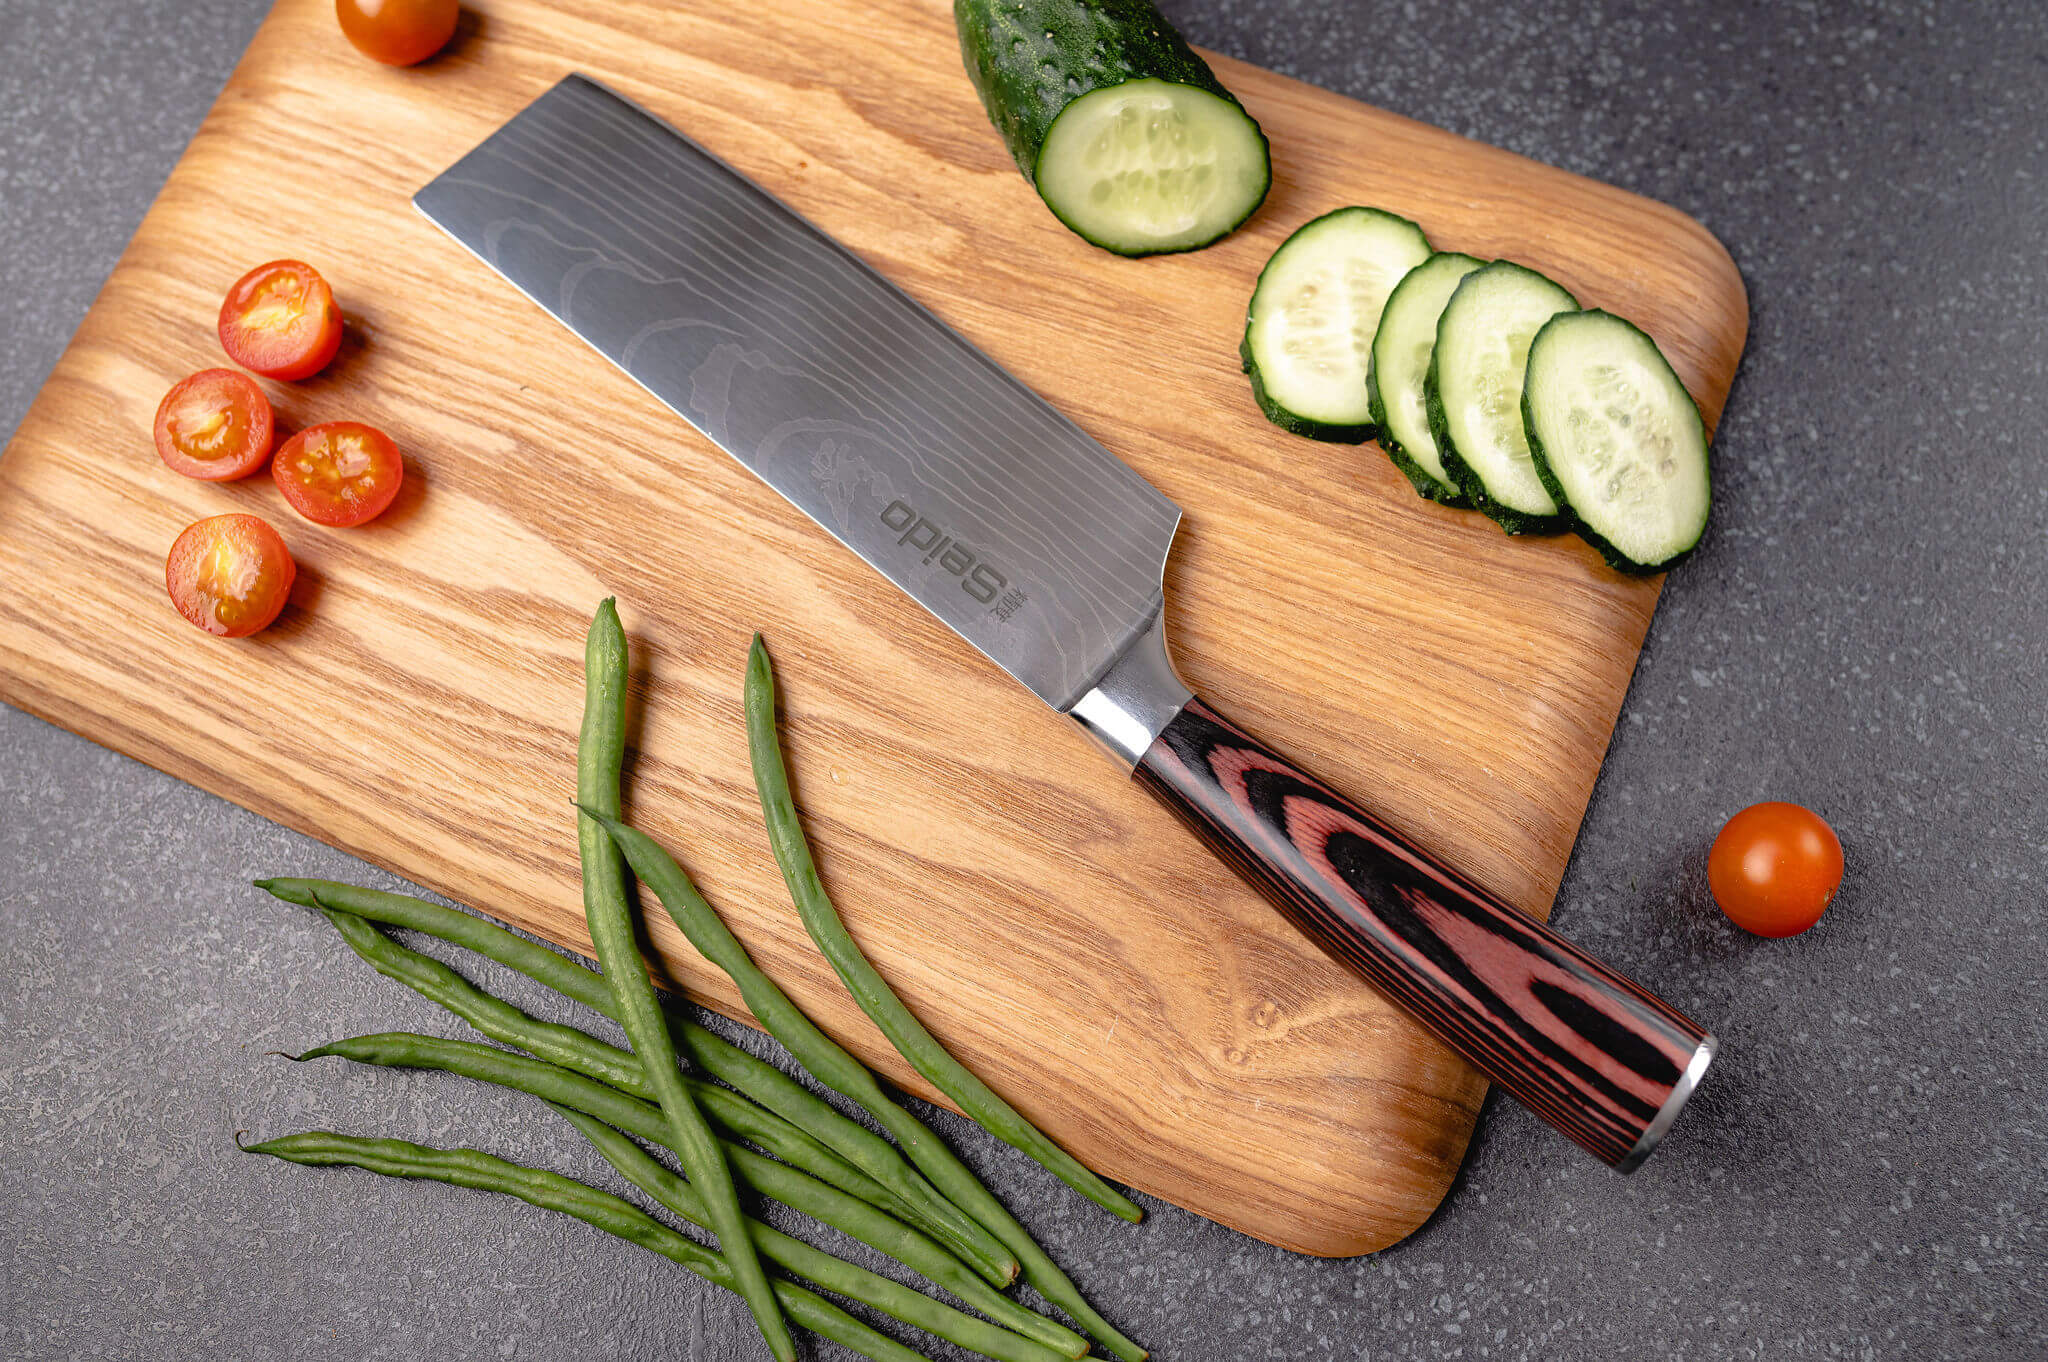 A knife on a cutting board with vegetables - a culinary scene of food preparation.